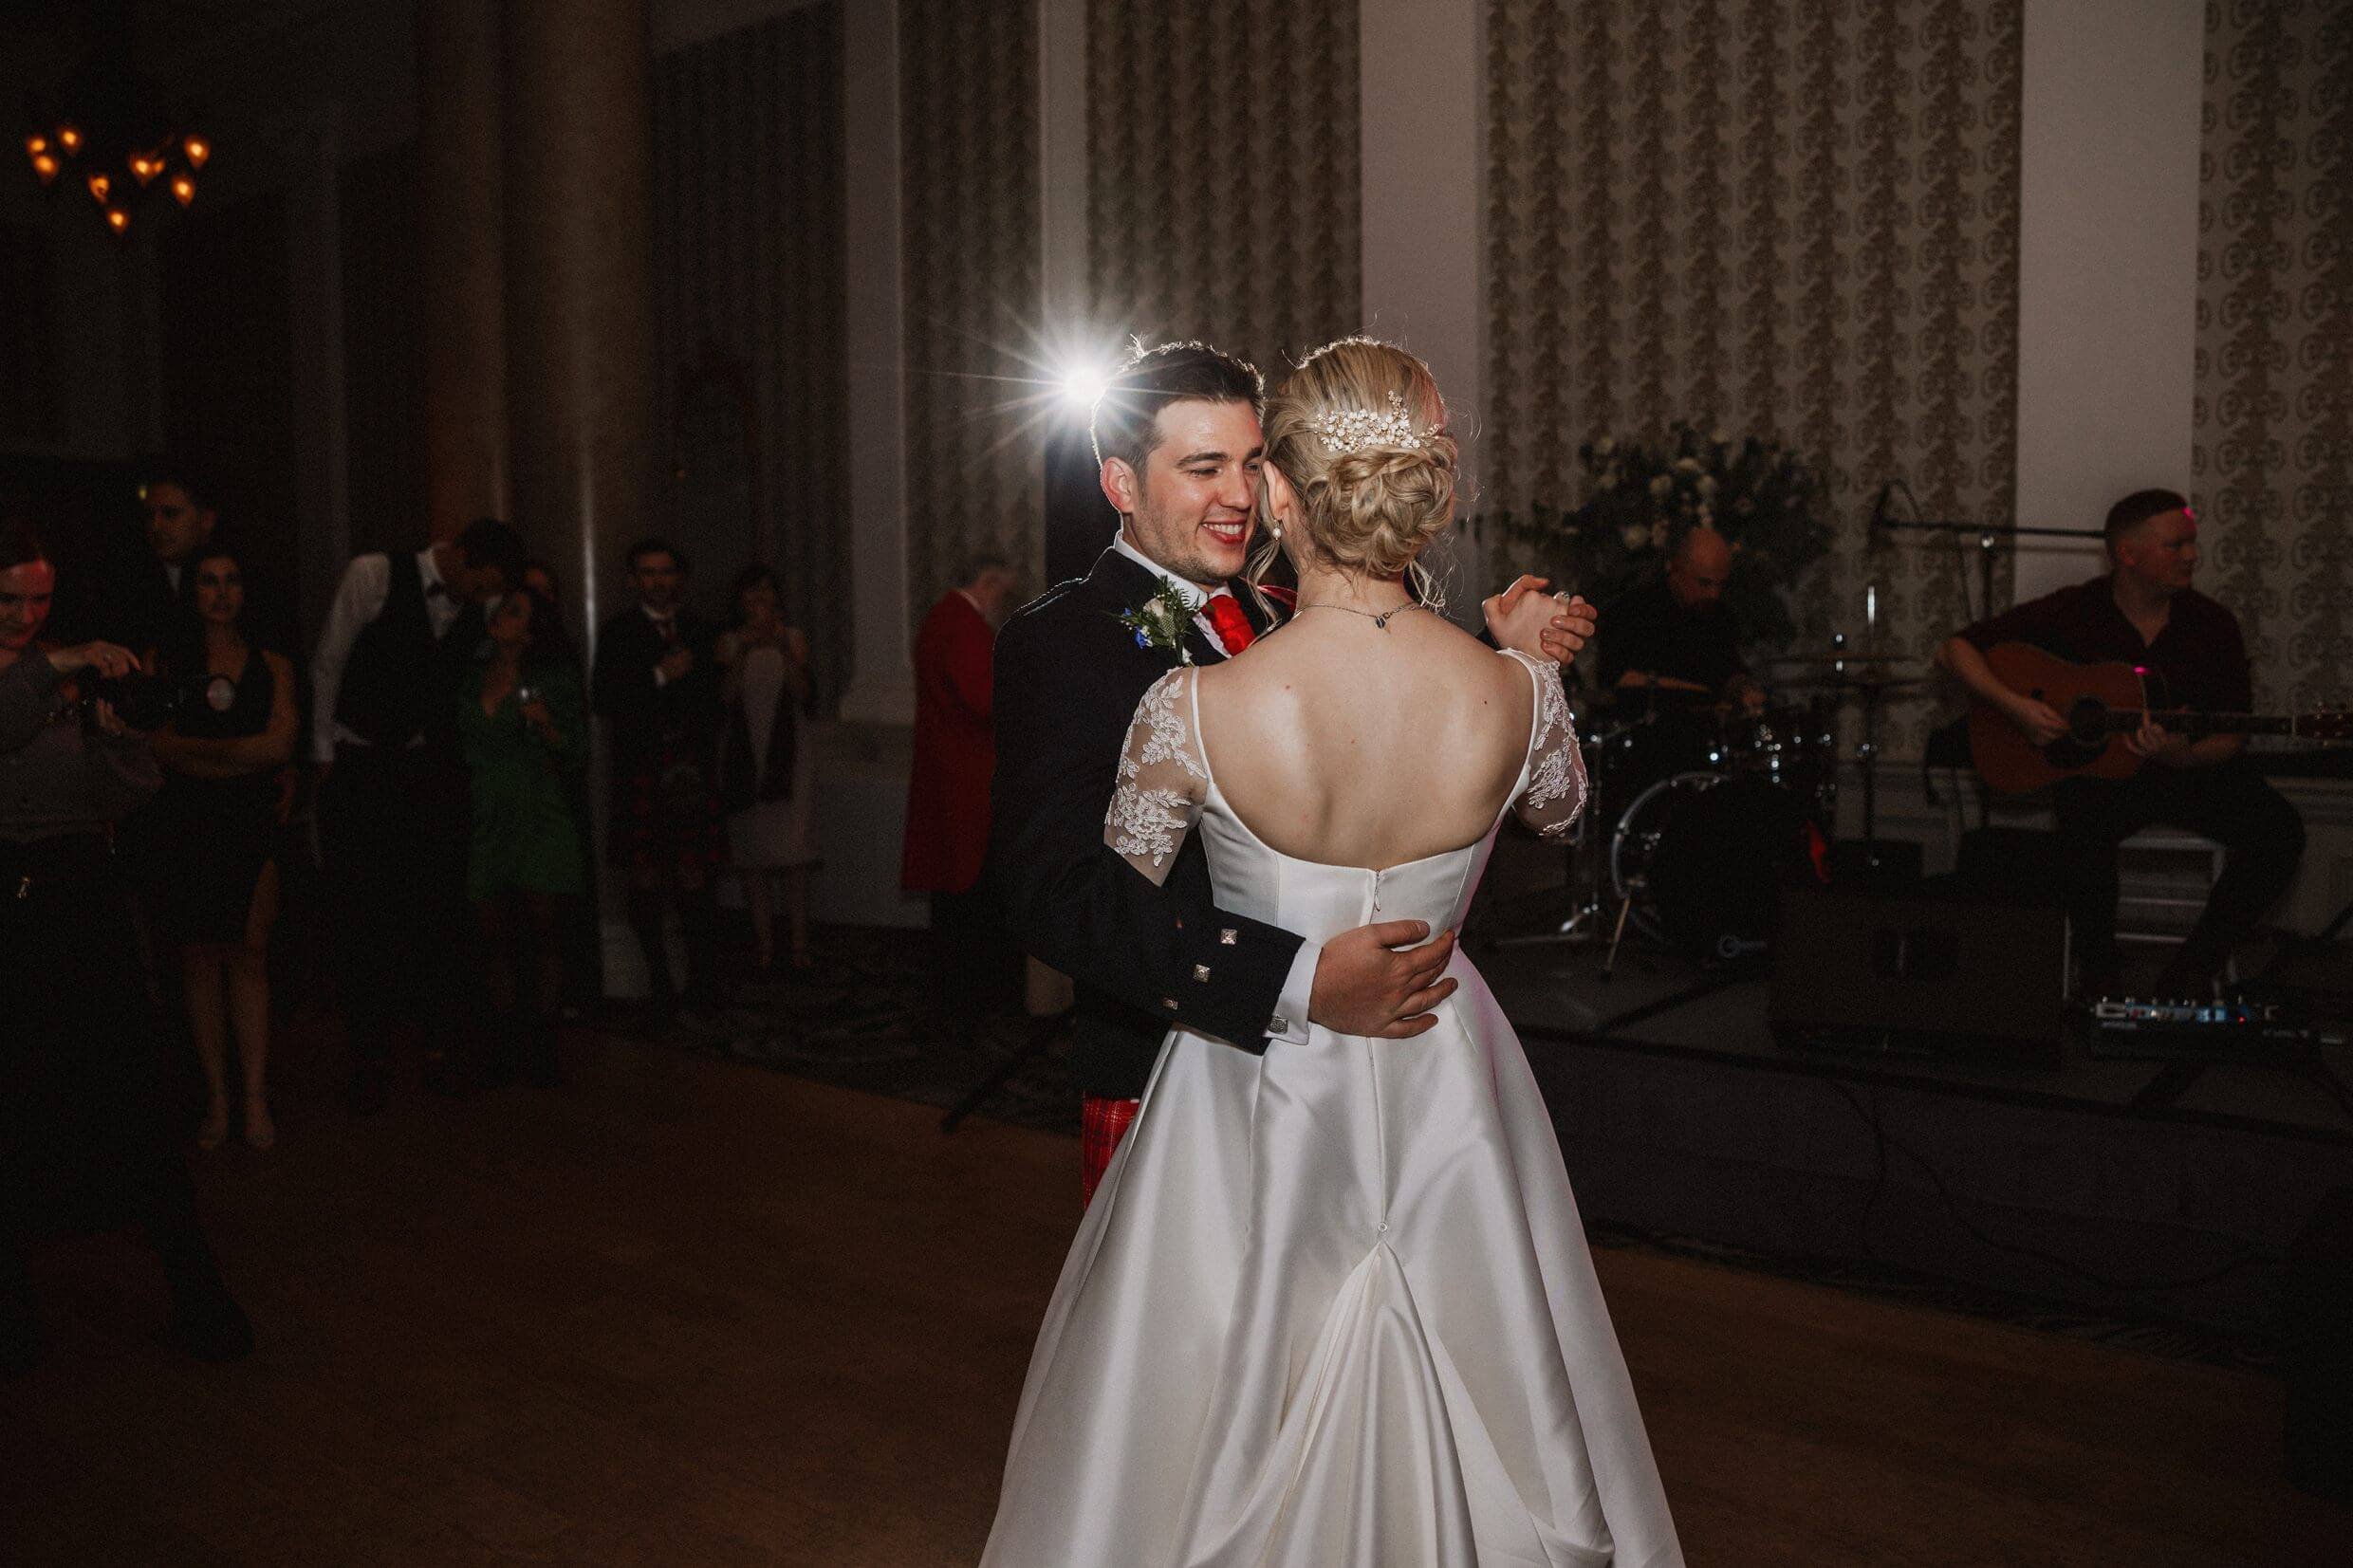 the bride and groom's first dance at the balmoral hotel edinburgh wedding venue in scotland with the band visible in the background